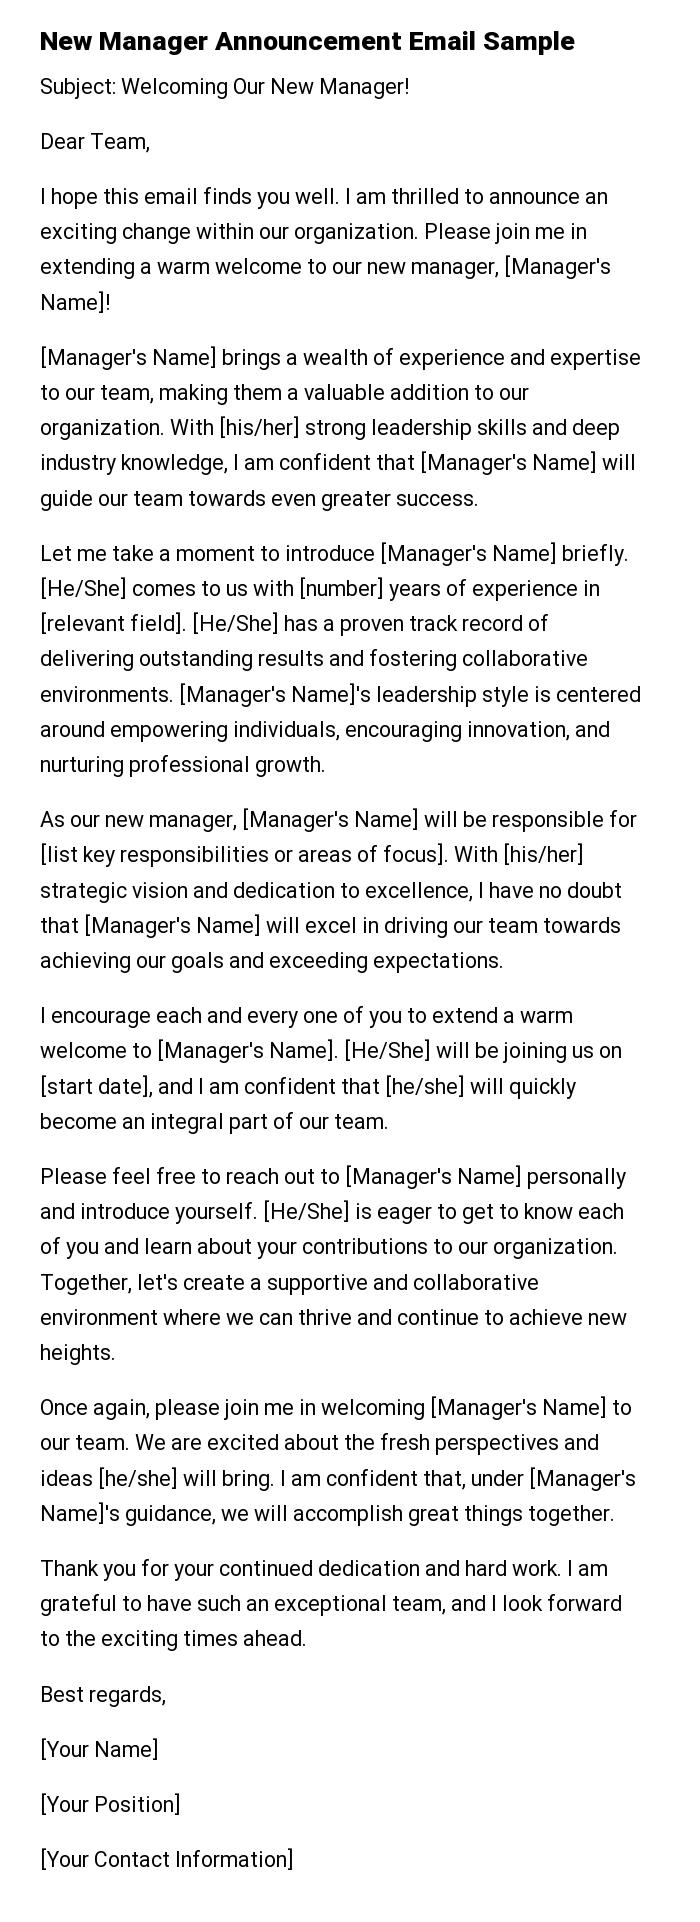 New Manager Announcement Email Sample